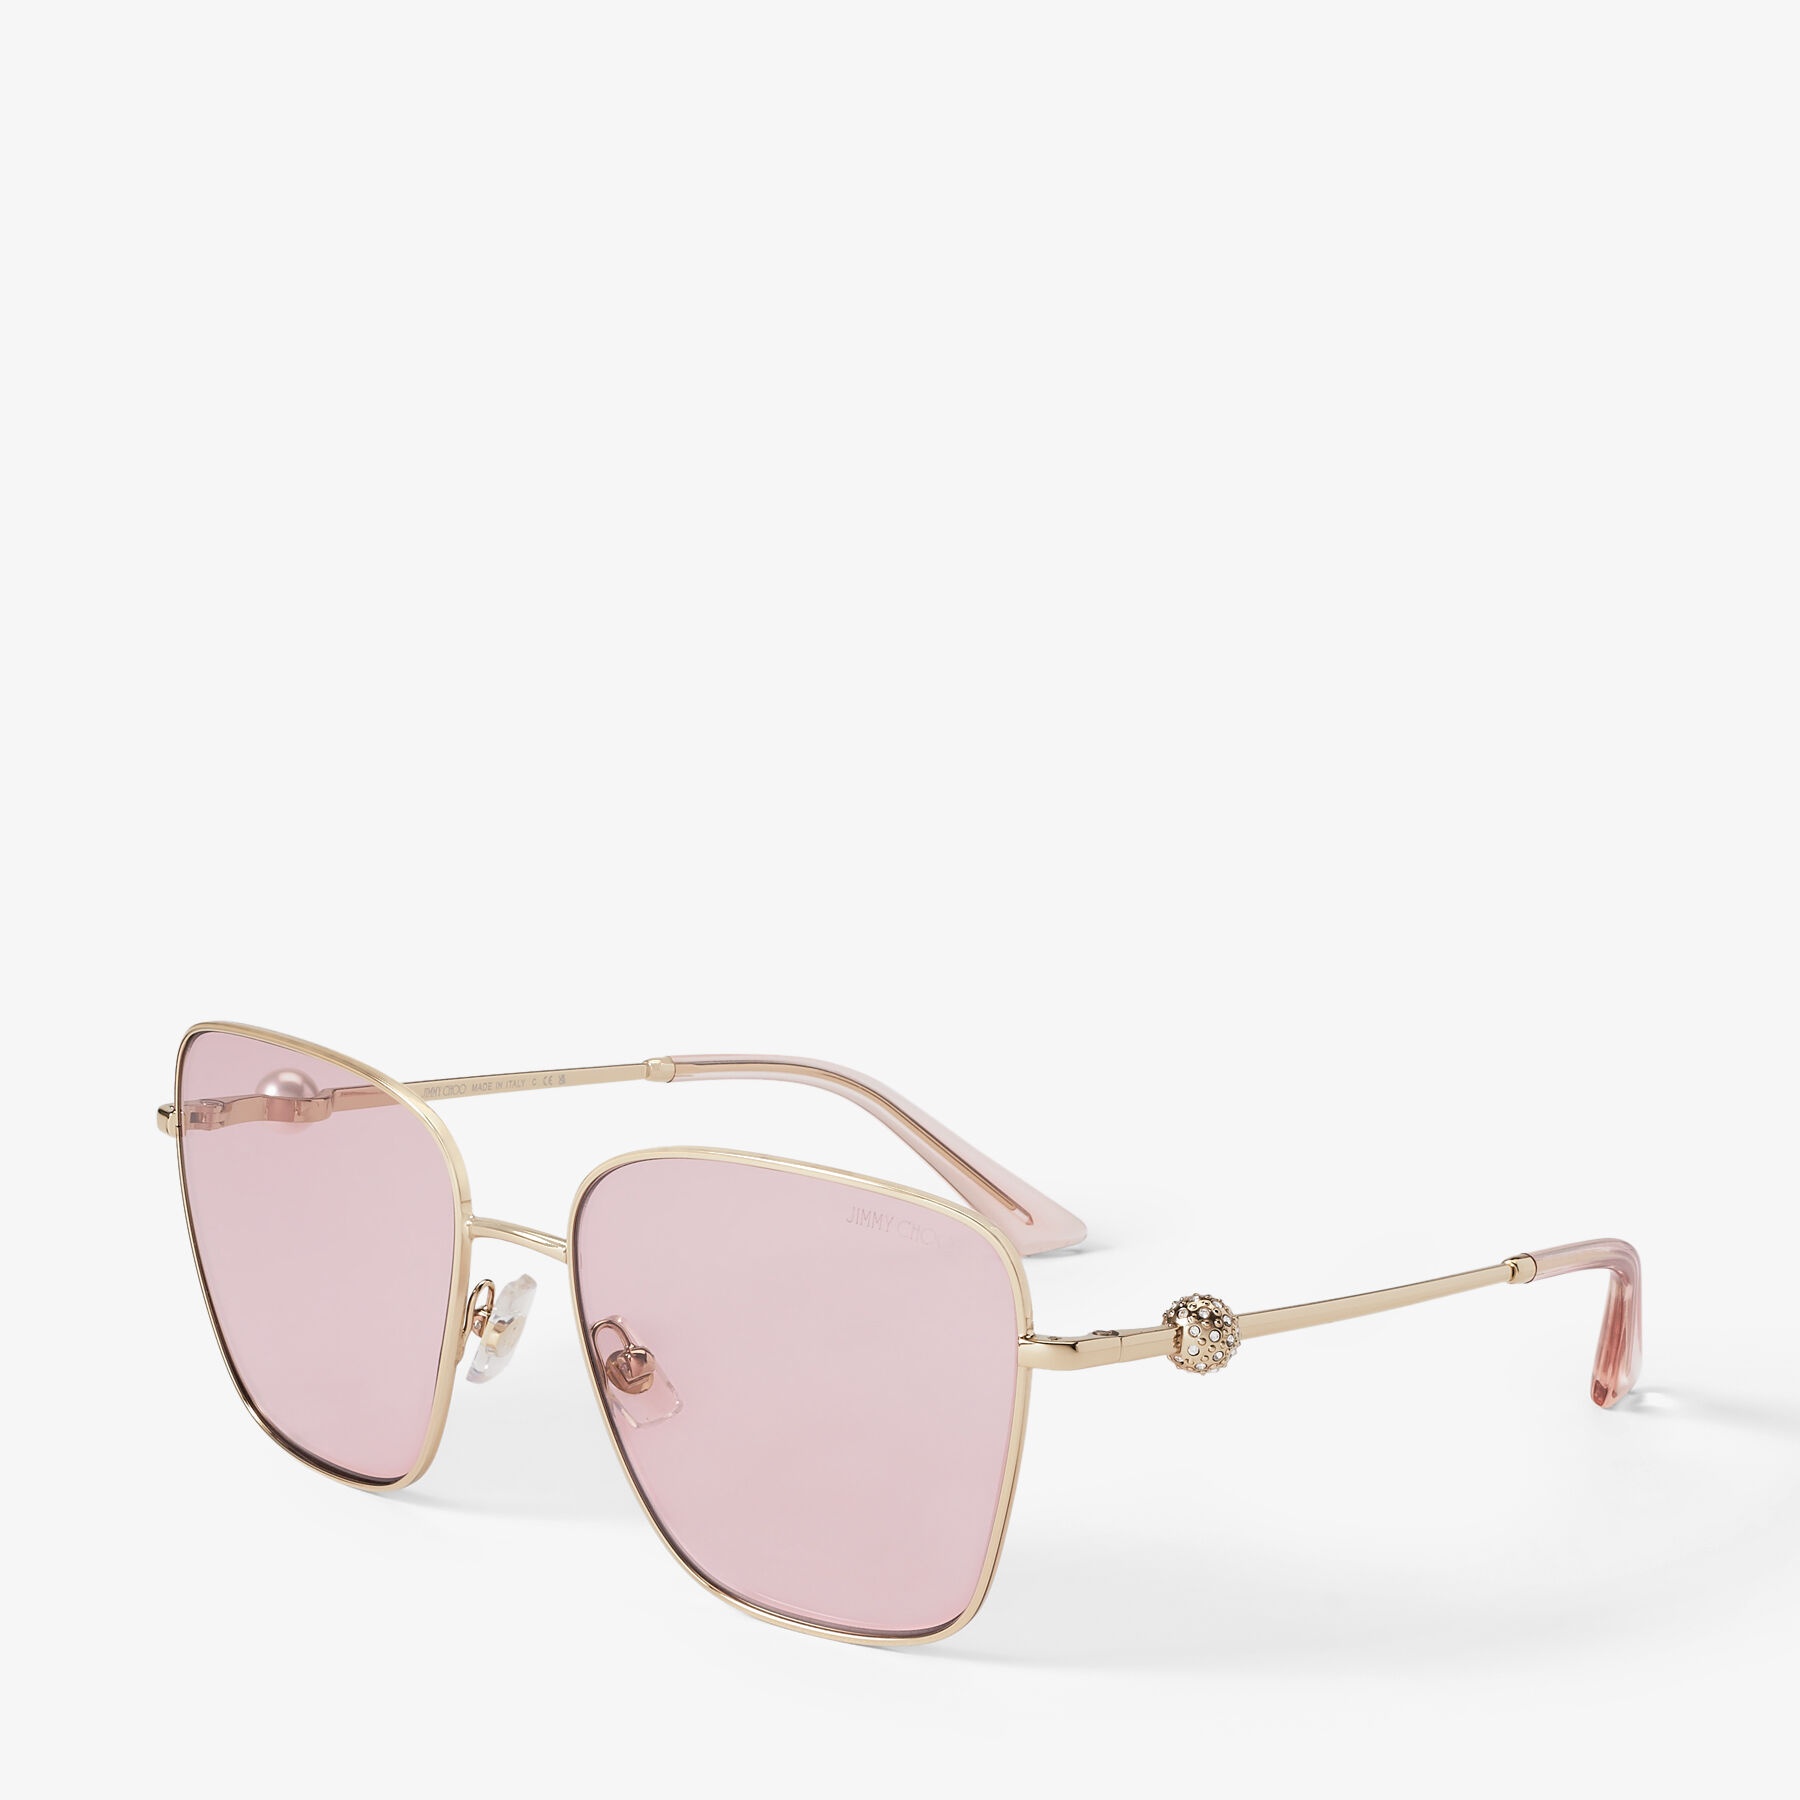 Pua
Pale Gold Square Sunglasses with Crystals - 3